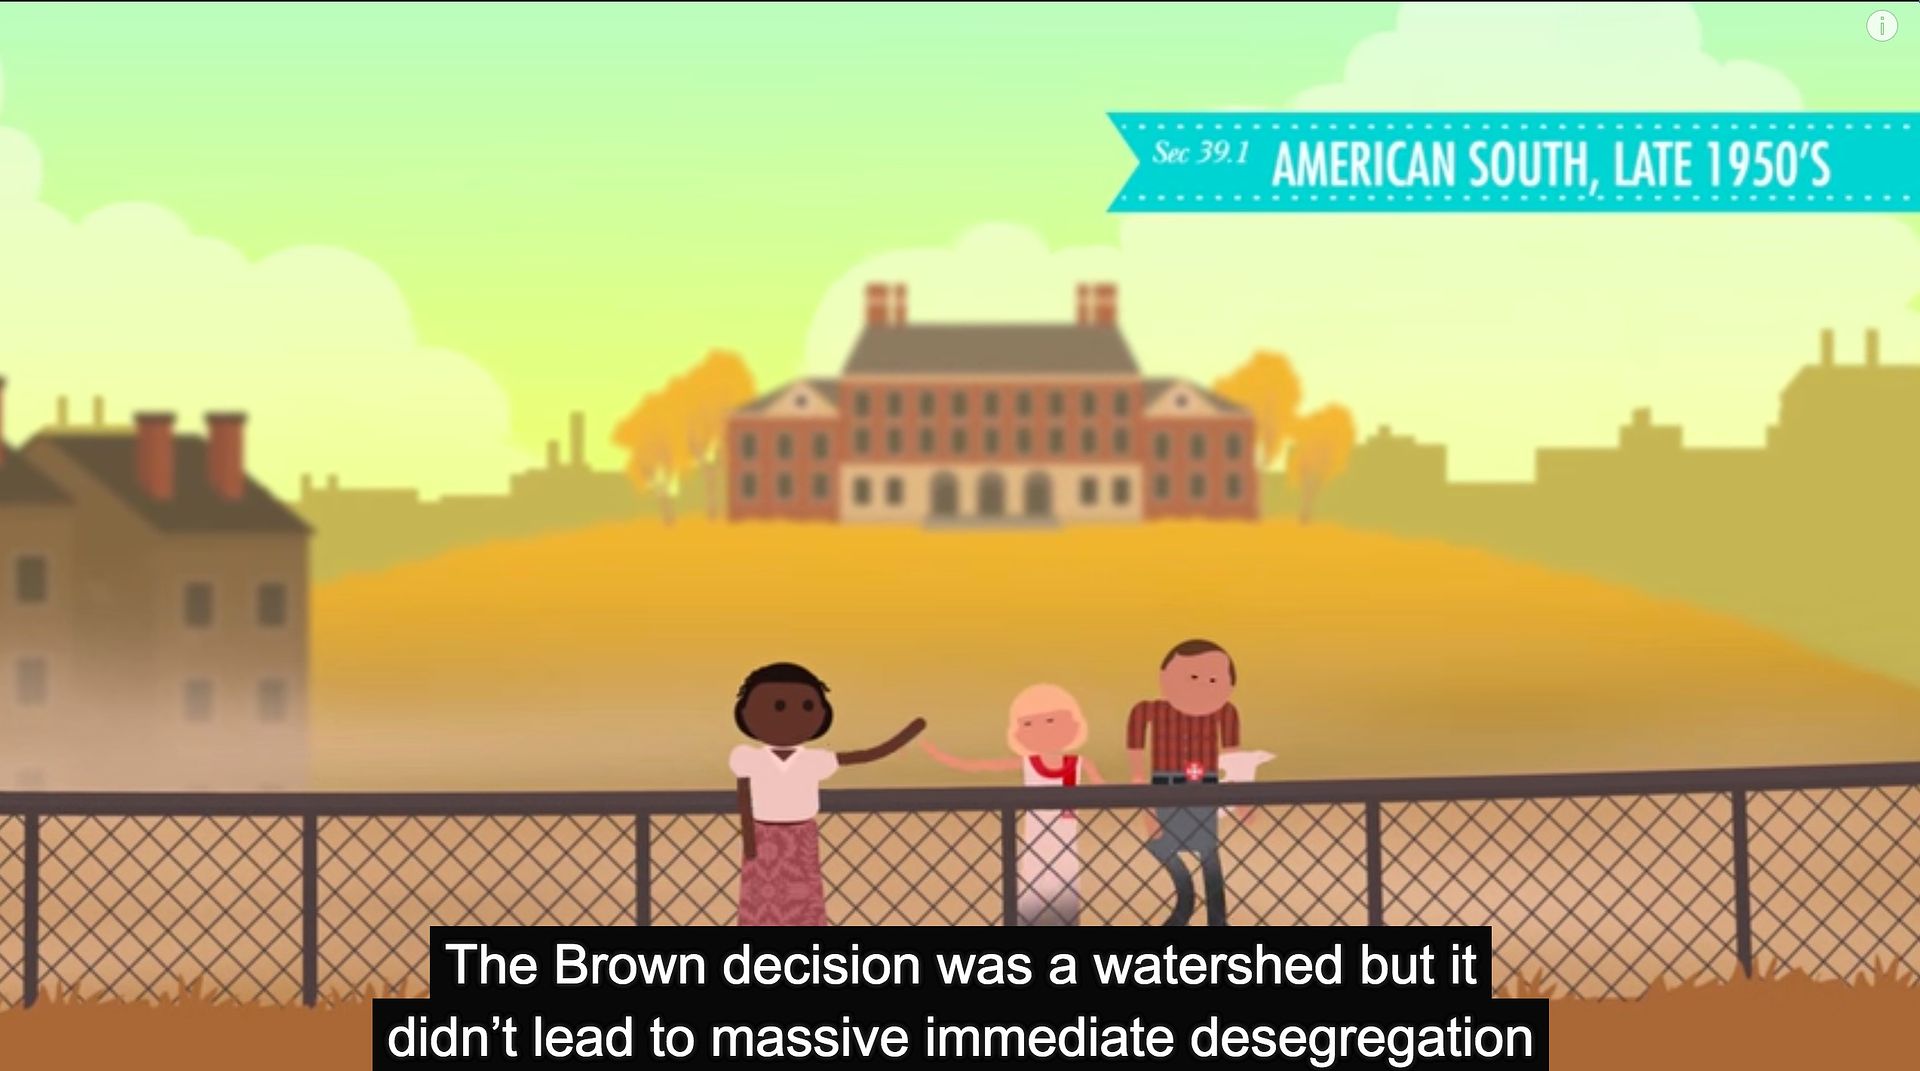 MLK resources for kids: Crash Course 1950s US History video